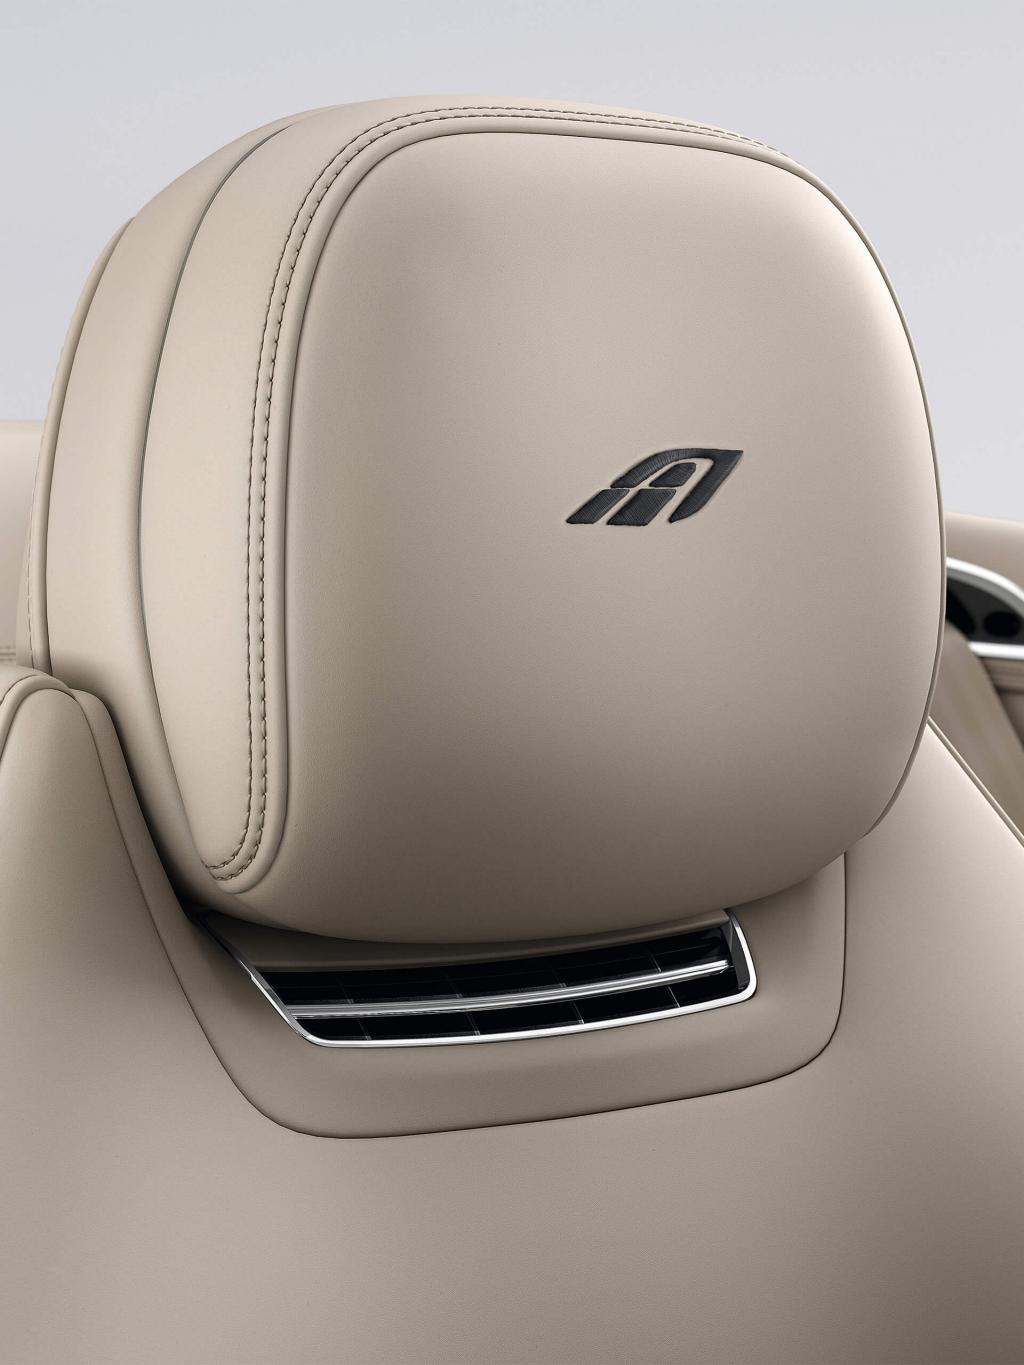 "Close up on Bentley Continental GTC A V8 seat in Portland Hide featuring A Emblem in Contrast Stitching. "